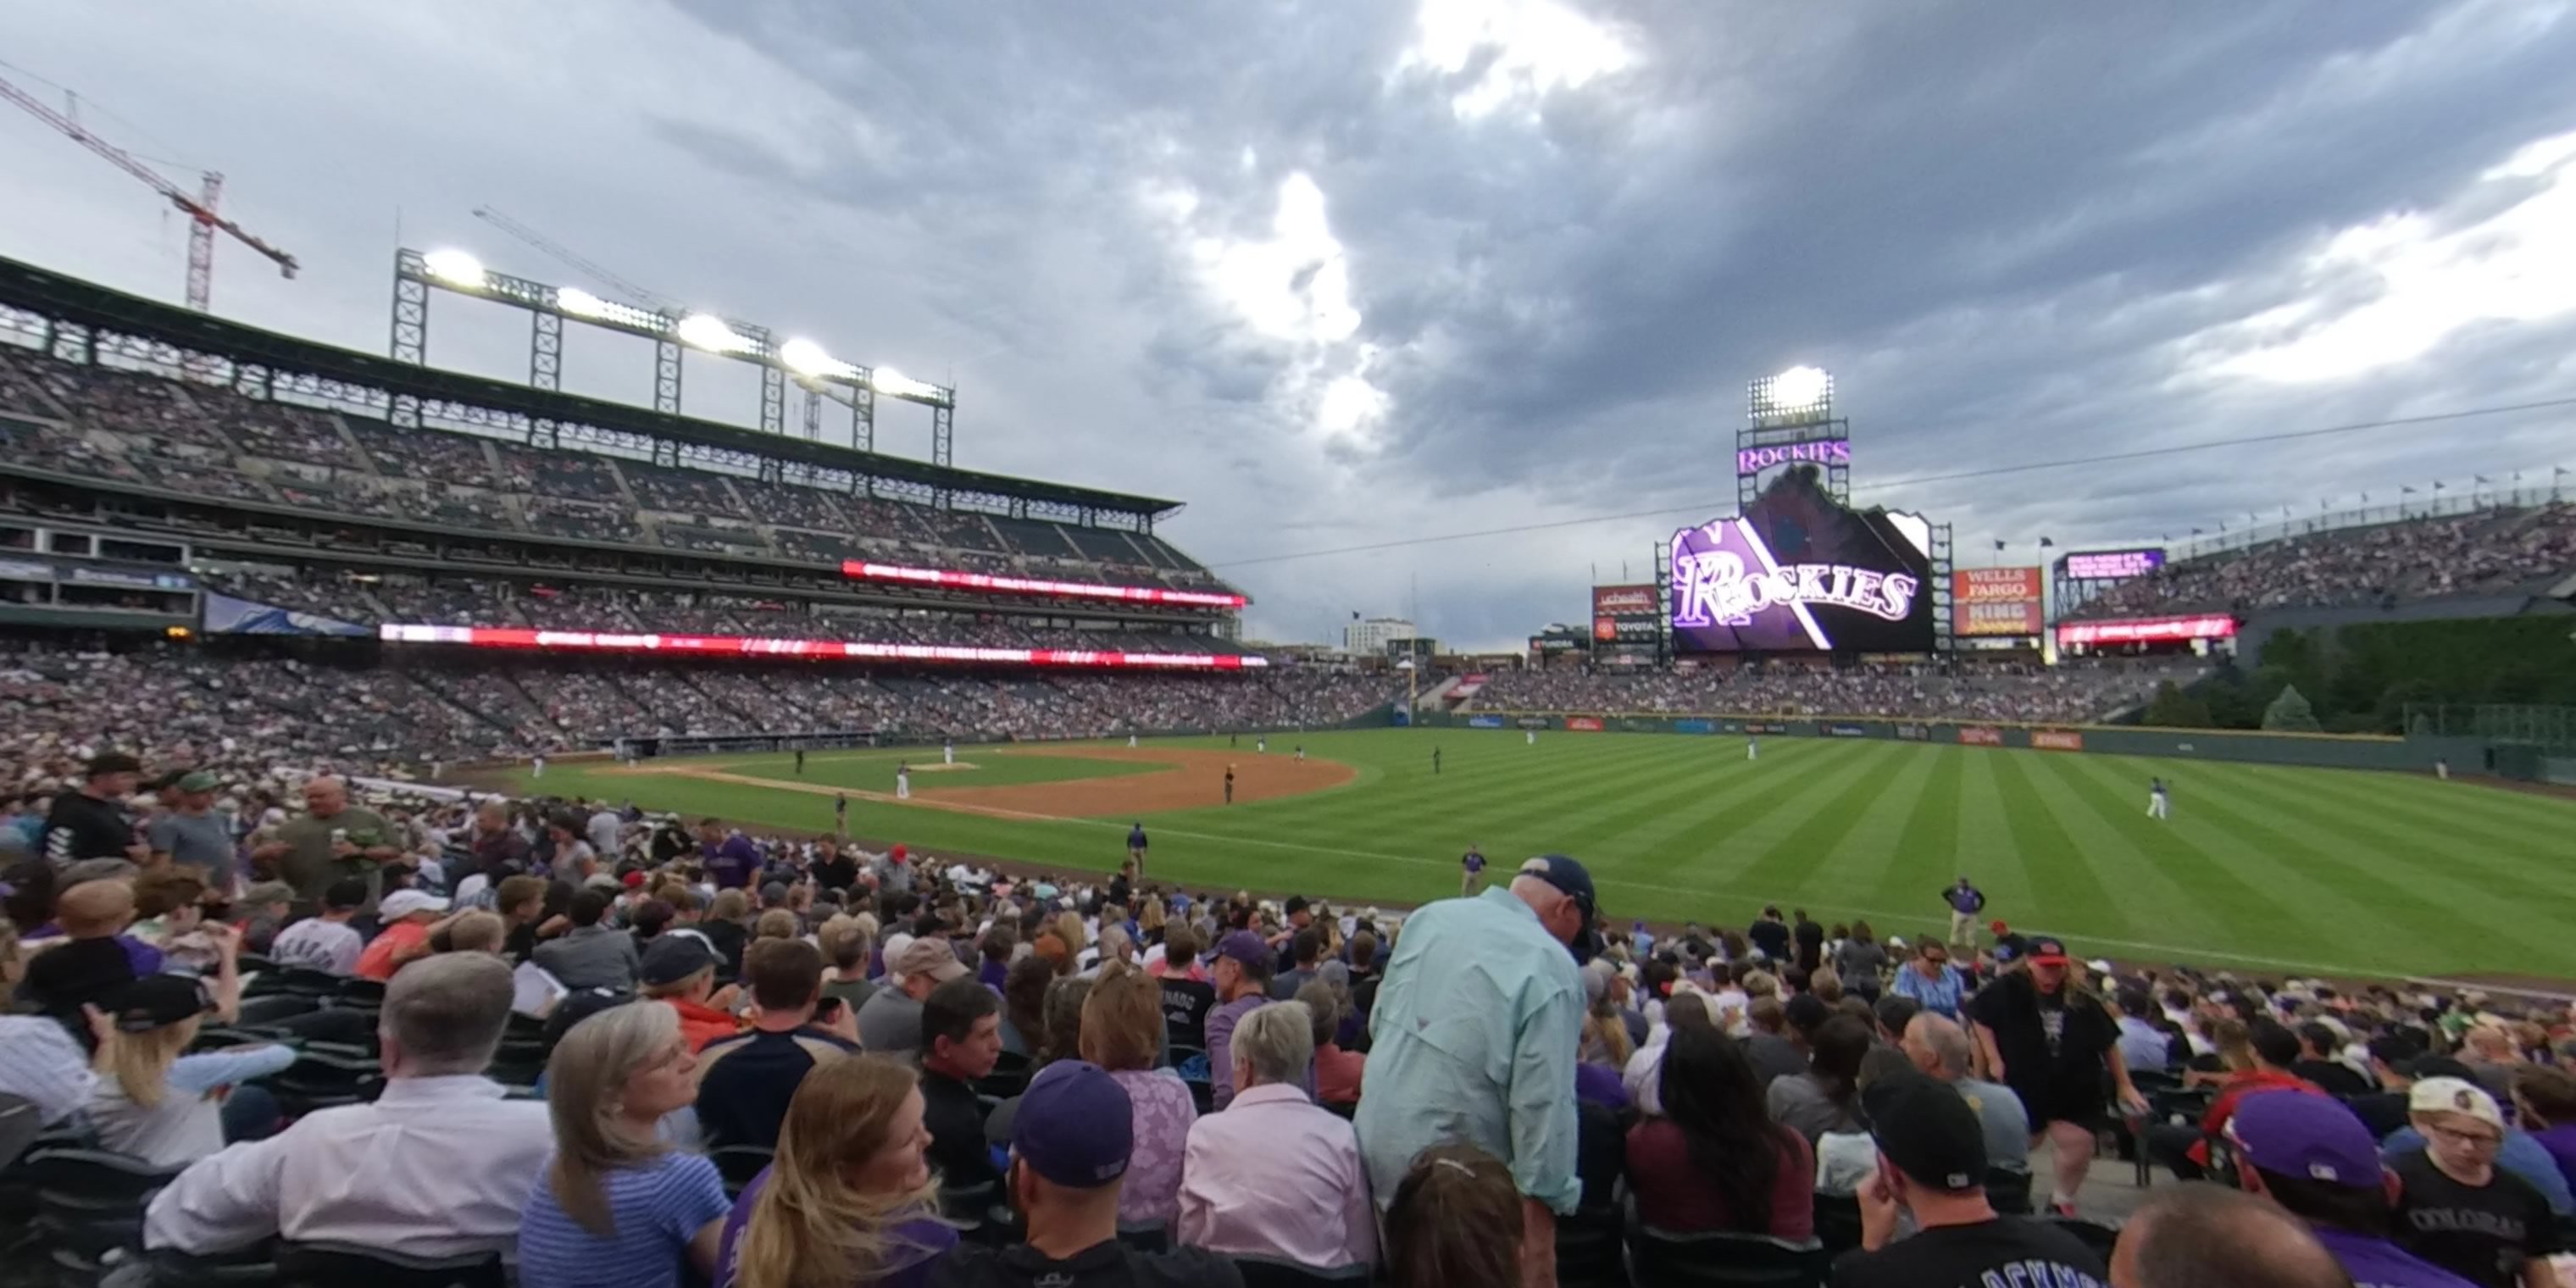 Section 116 At Coors Field